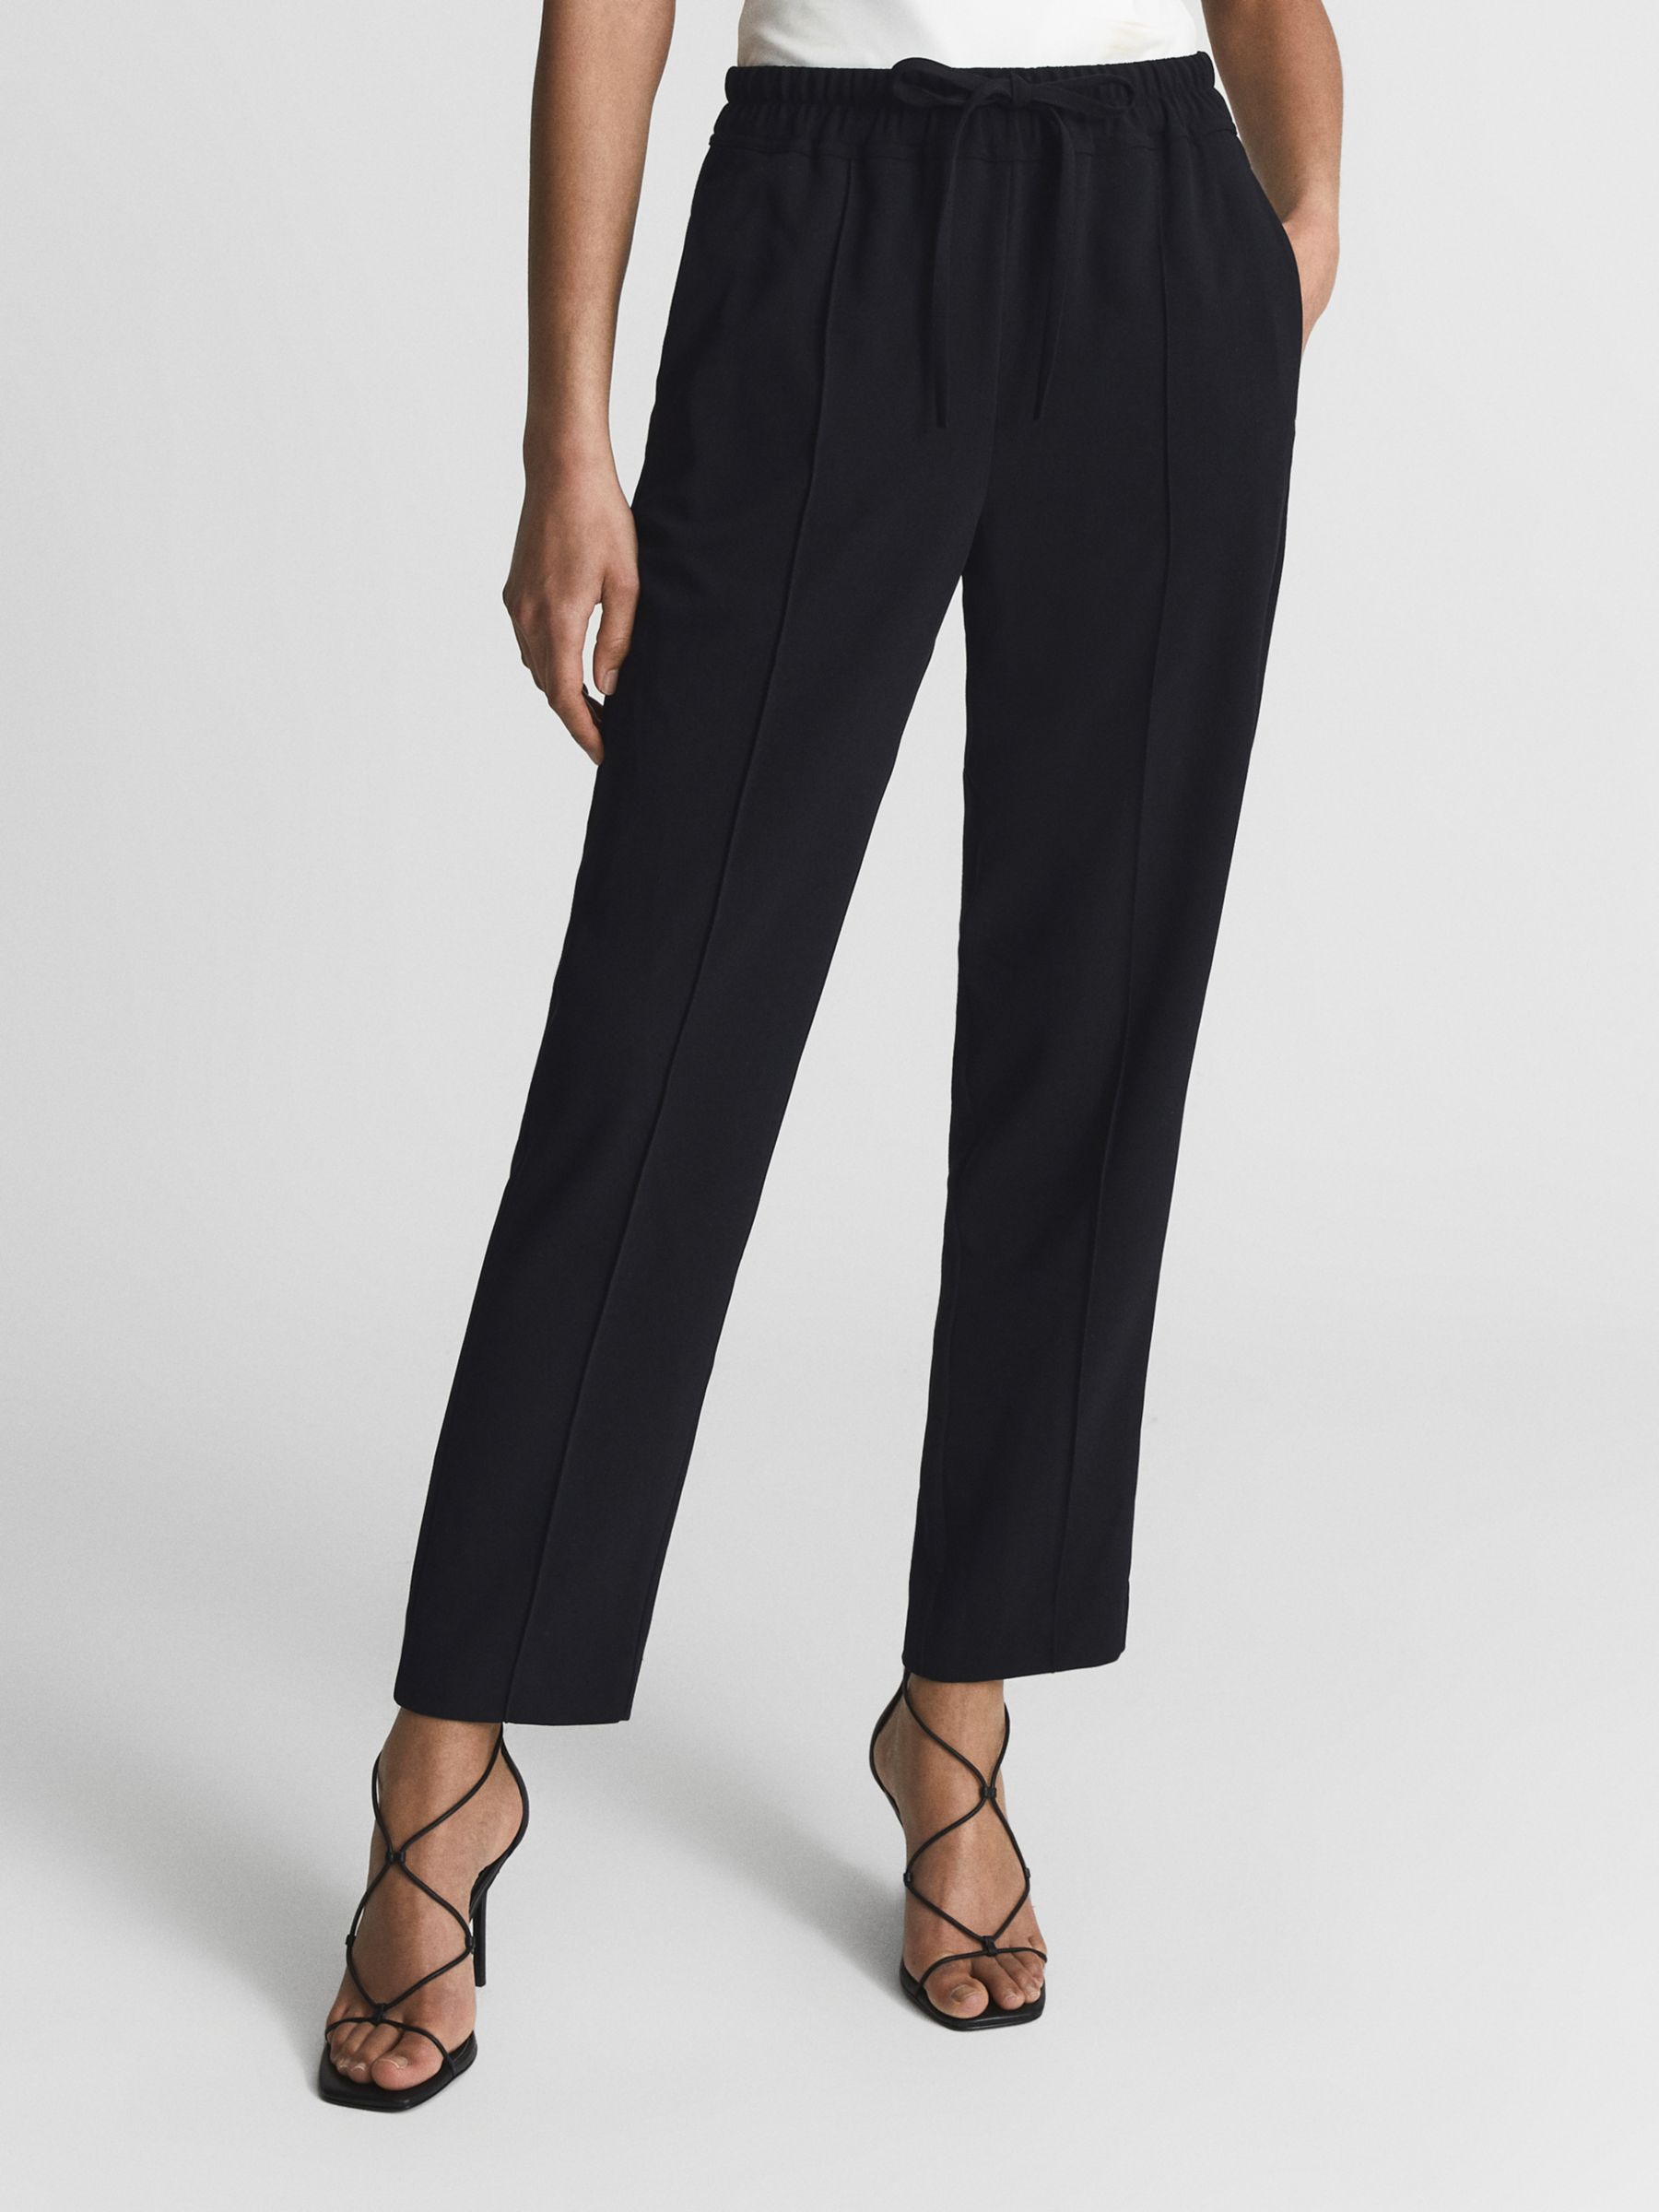 Reiss Hailey Cropped Trousers, Jet Black at John Lewis & Partners